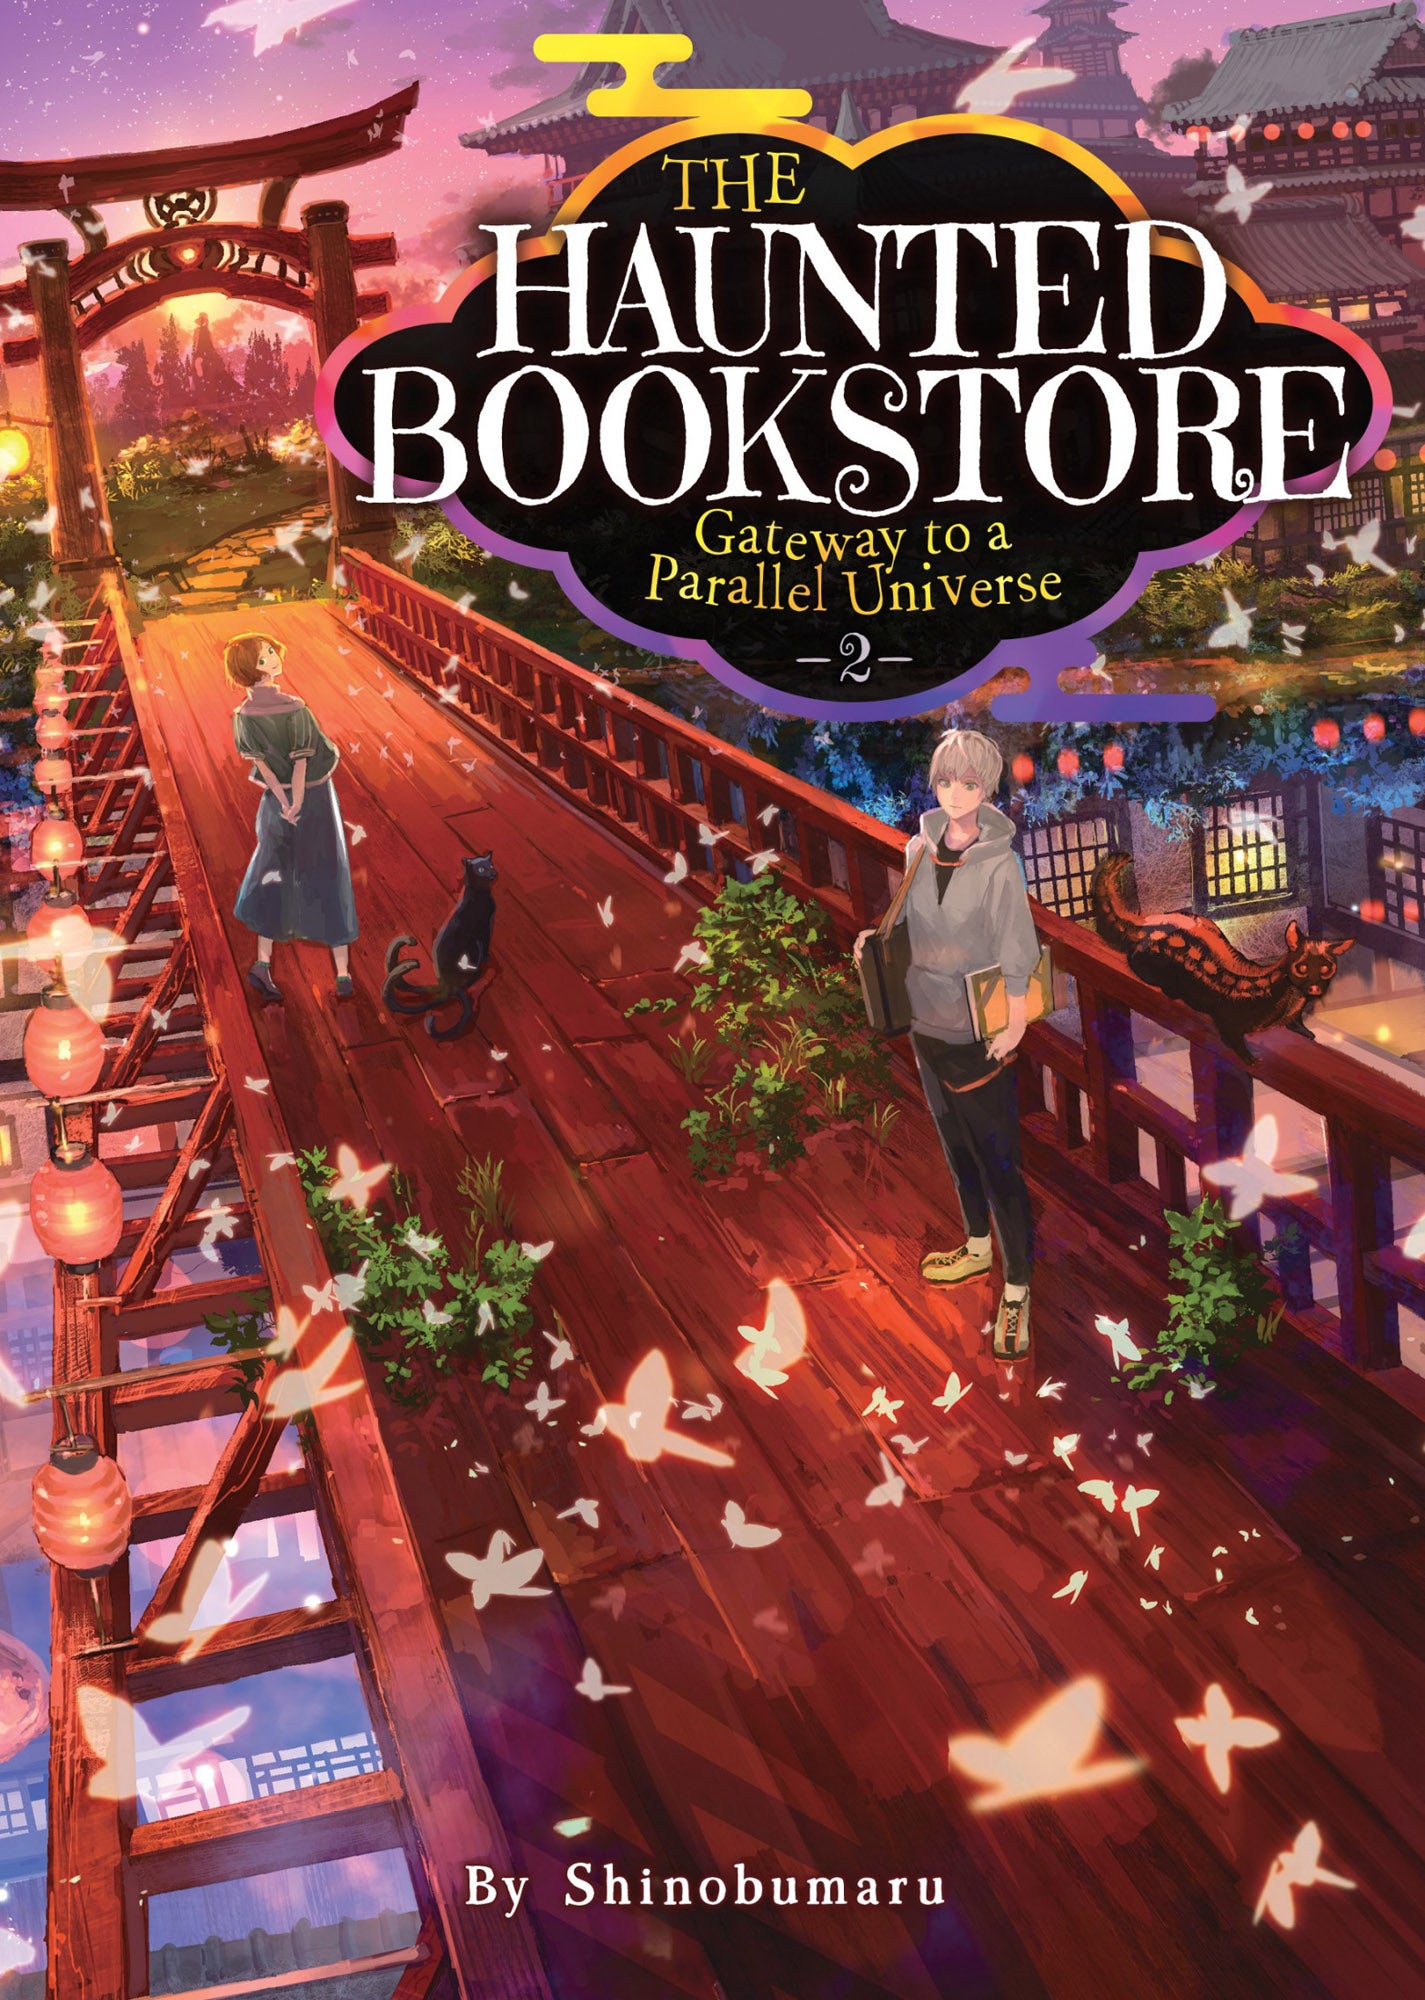 The Haunted Bookstore - Gateway to a Parallel Universe (Light Novel) Vol. 02